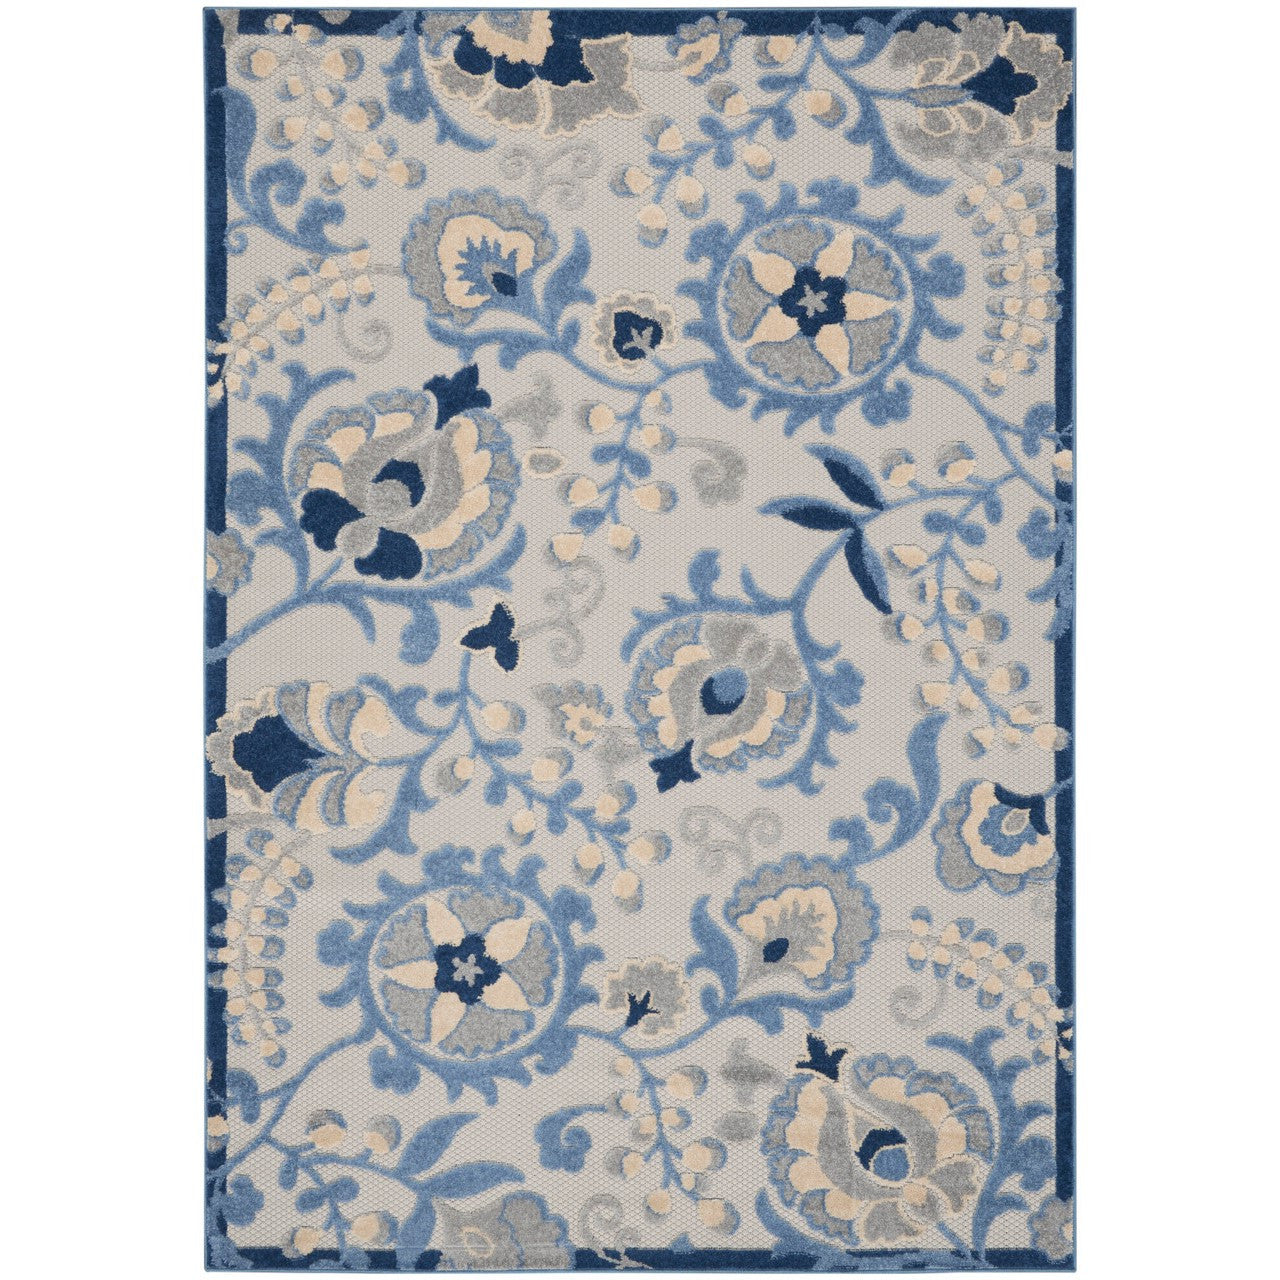 9' X 12' Blue And Grey Toile Non Skid Indoor Outdoor Area Rug